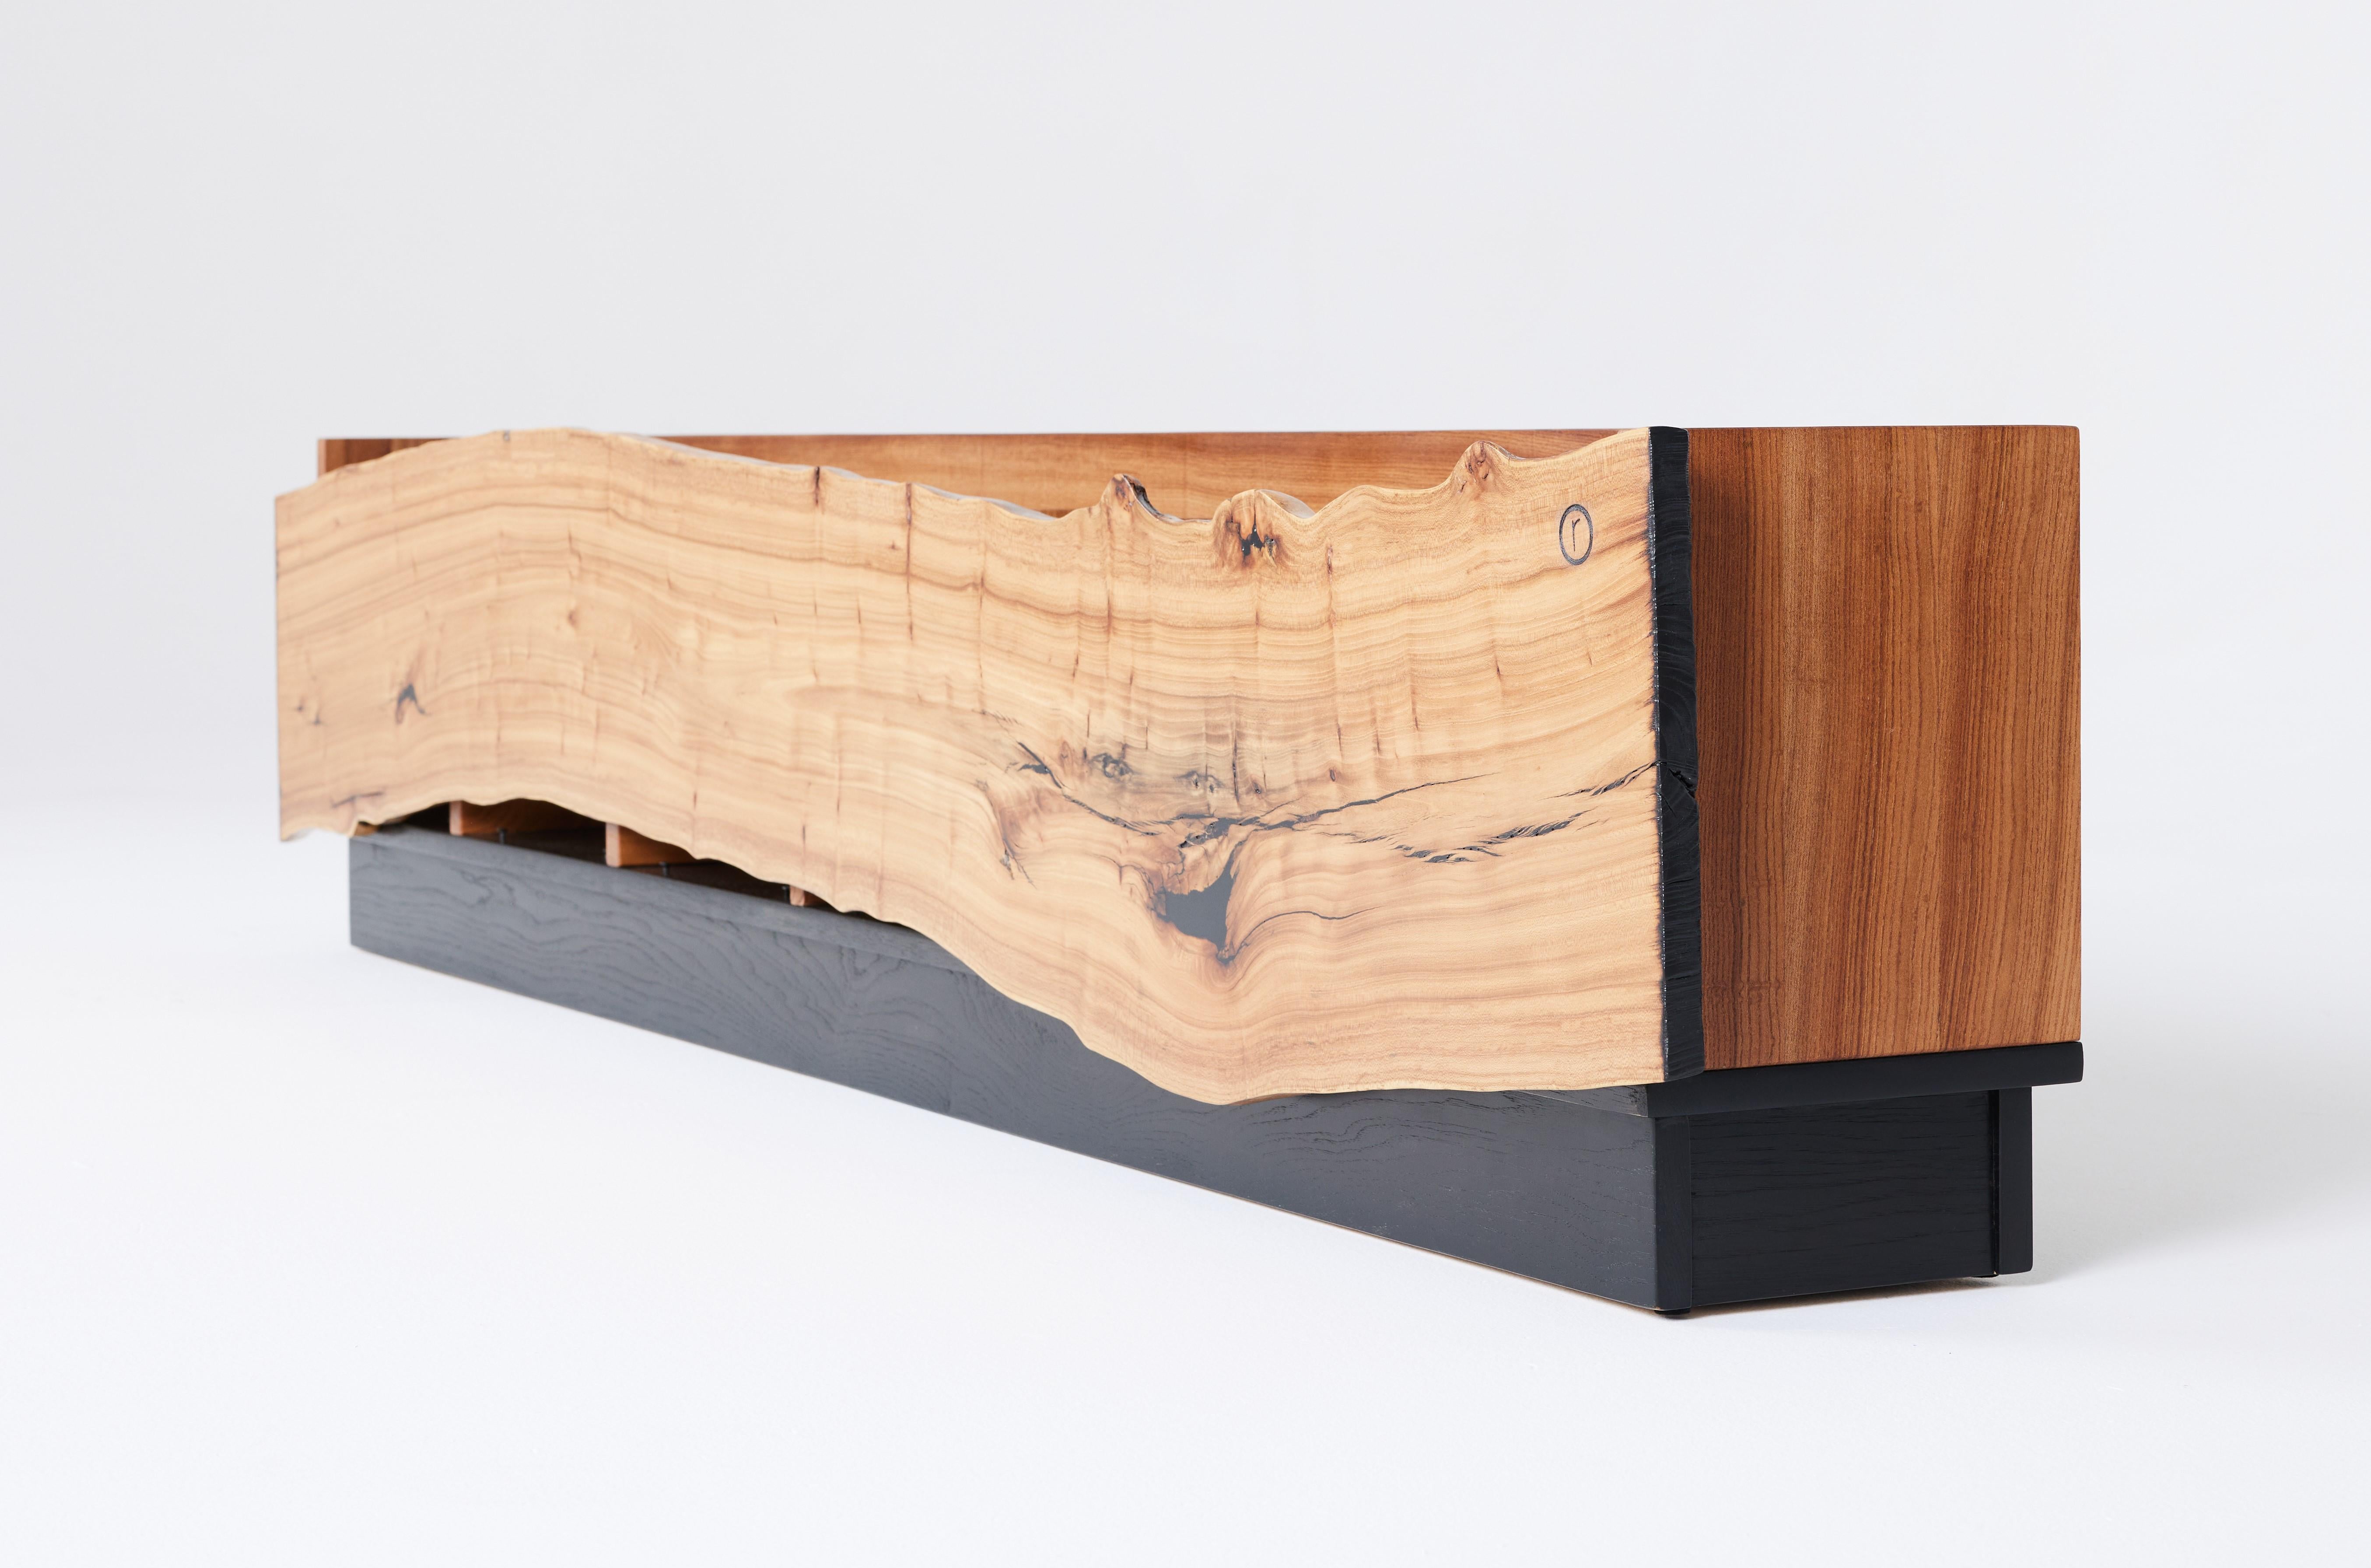 This modern organic record console by Carlo Stenta is made of multiple elm wood slabs milled from a single elm tree. The record console case features skillfully crafted dividers that are sized with exactitude, allowing one to move their fingers